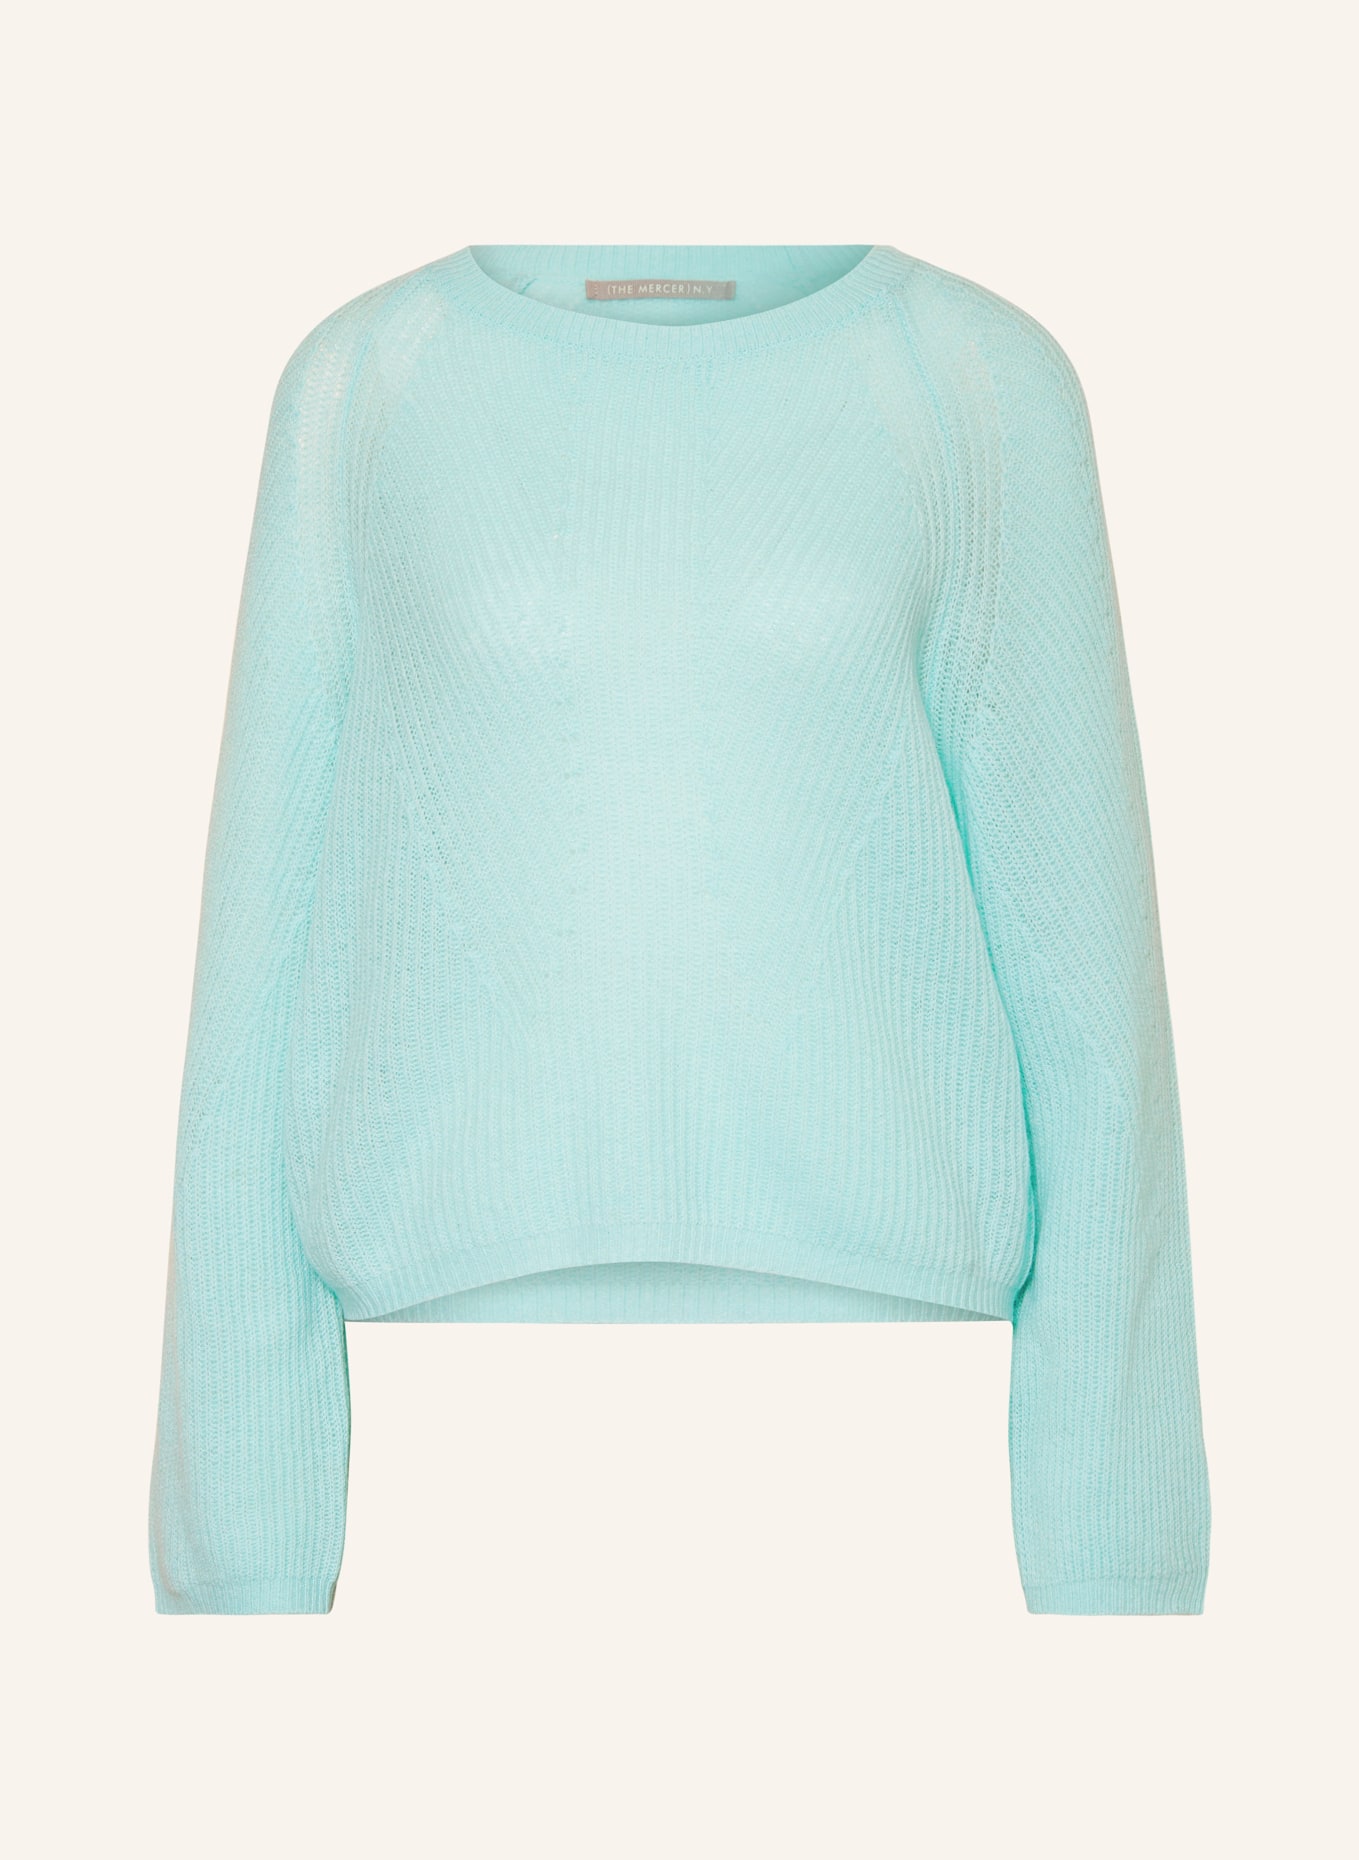 (THE MERCER) N.Y. Cashmere sweater, Color: TURQUOISE (Image 1)